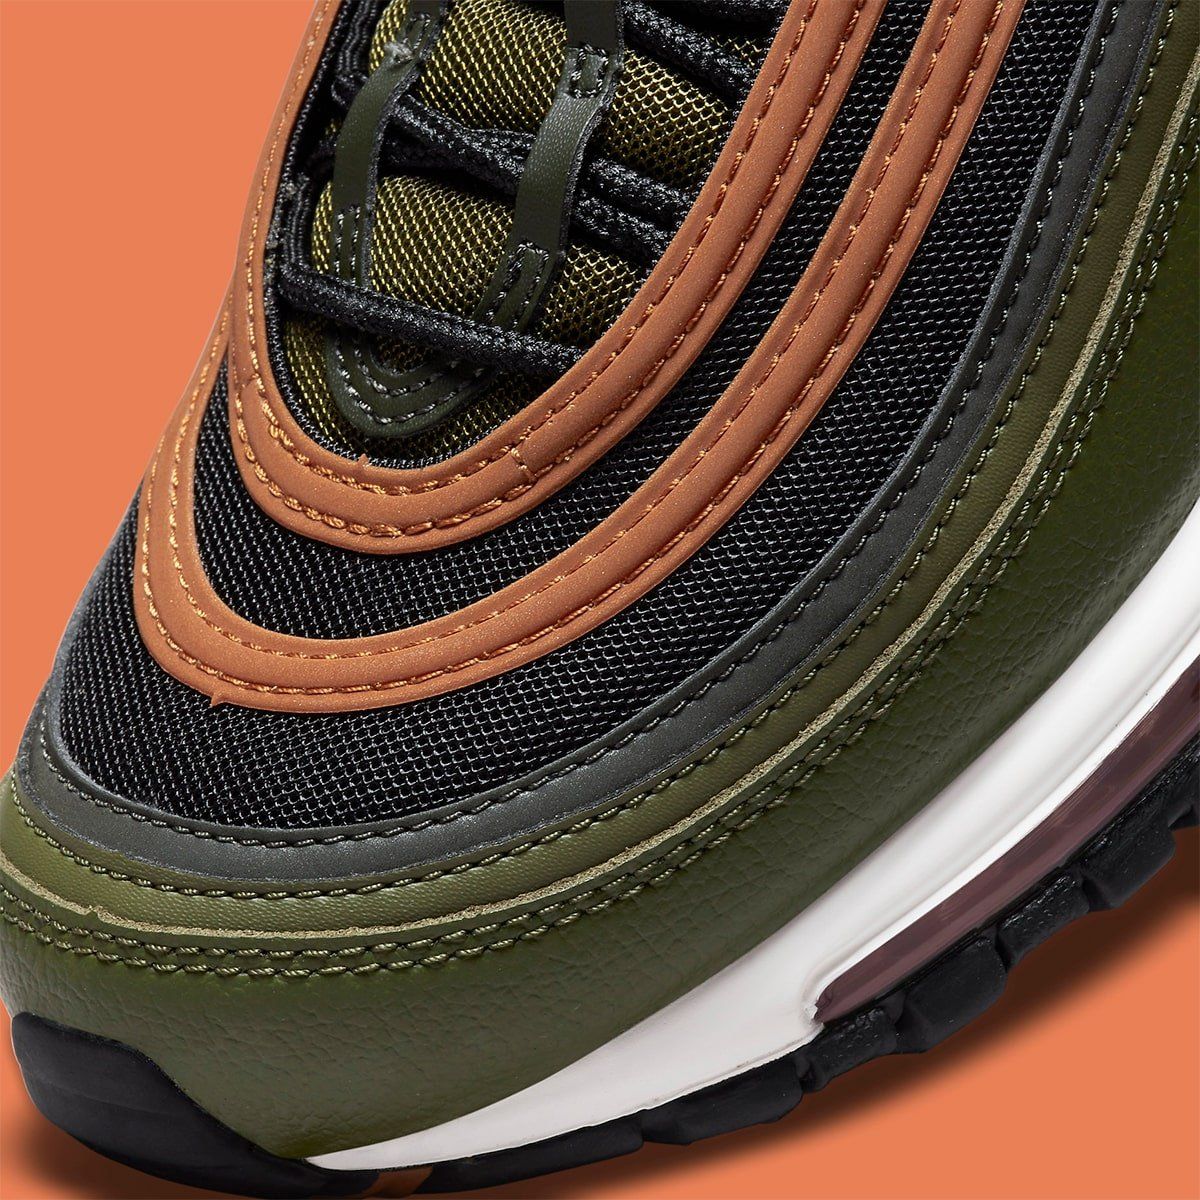 Available olive green air max 97 Now // Nike Air Max 97 "Rough Green" | HOUSE OF HEAT